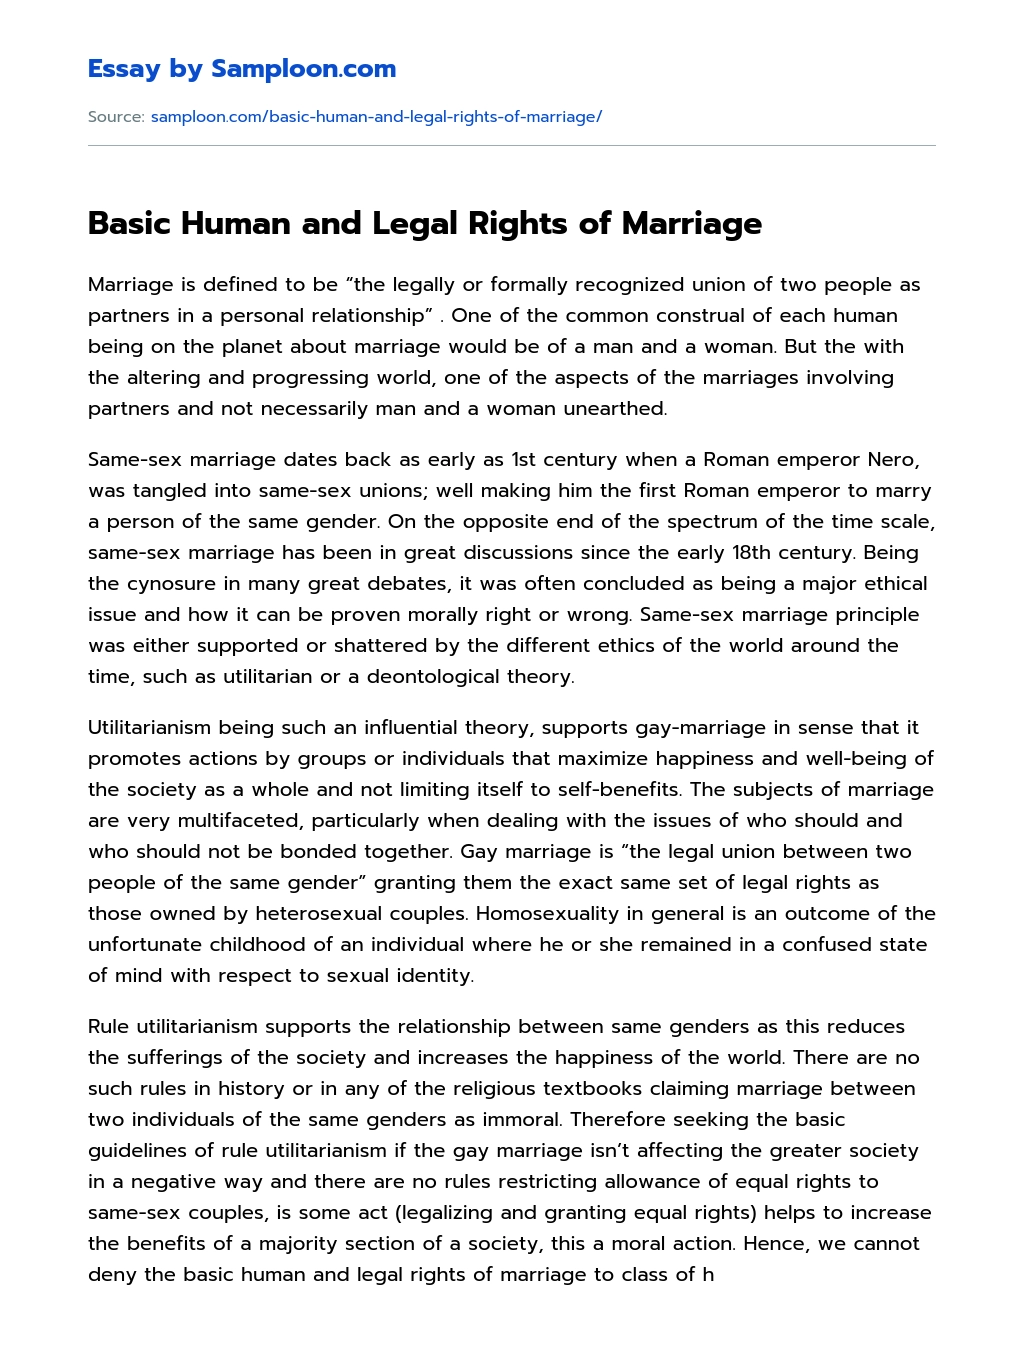 Basic Human and Legal Rights of Marriage essay